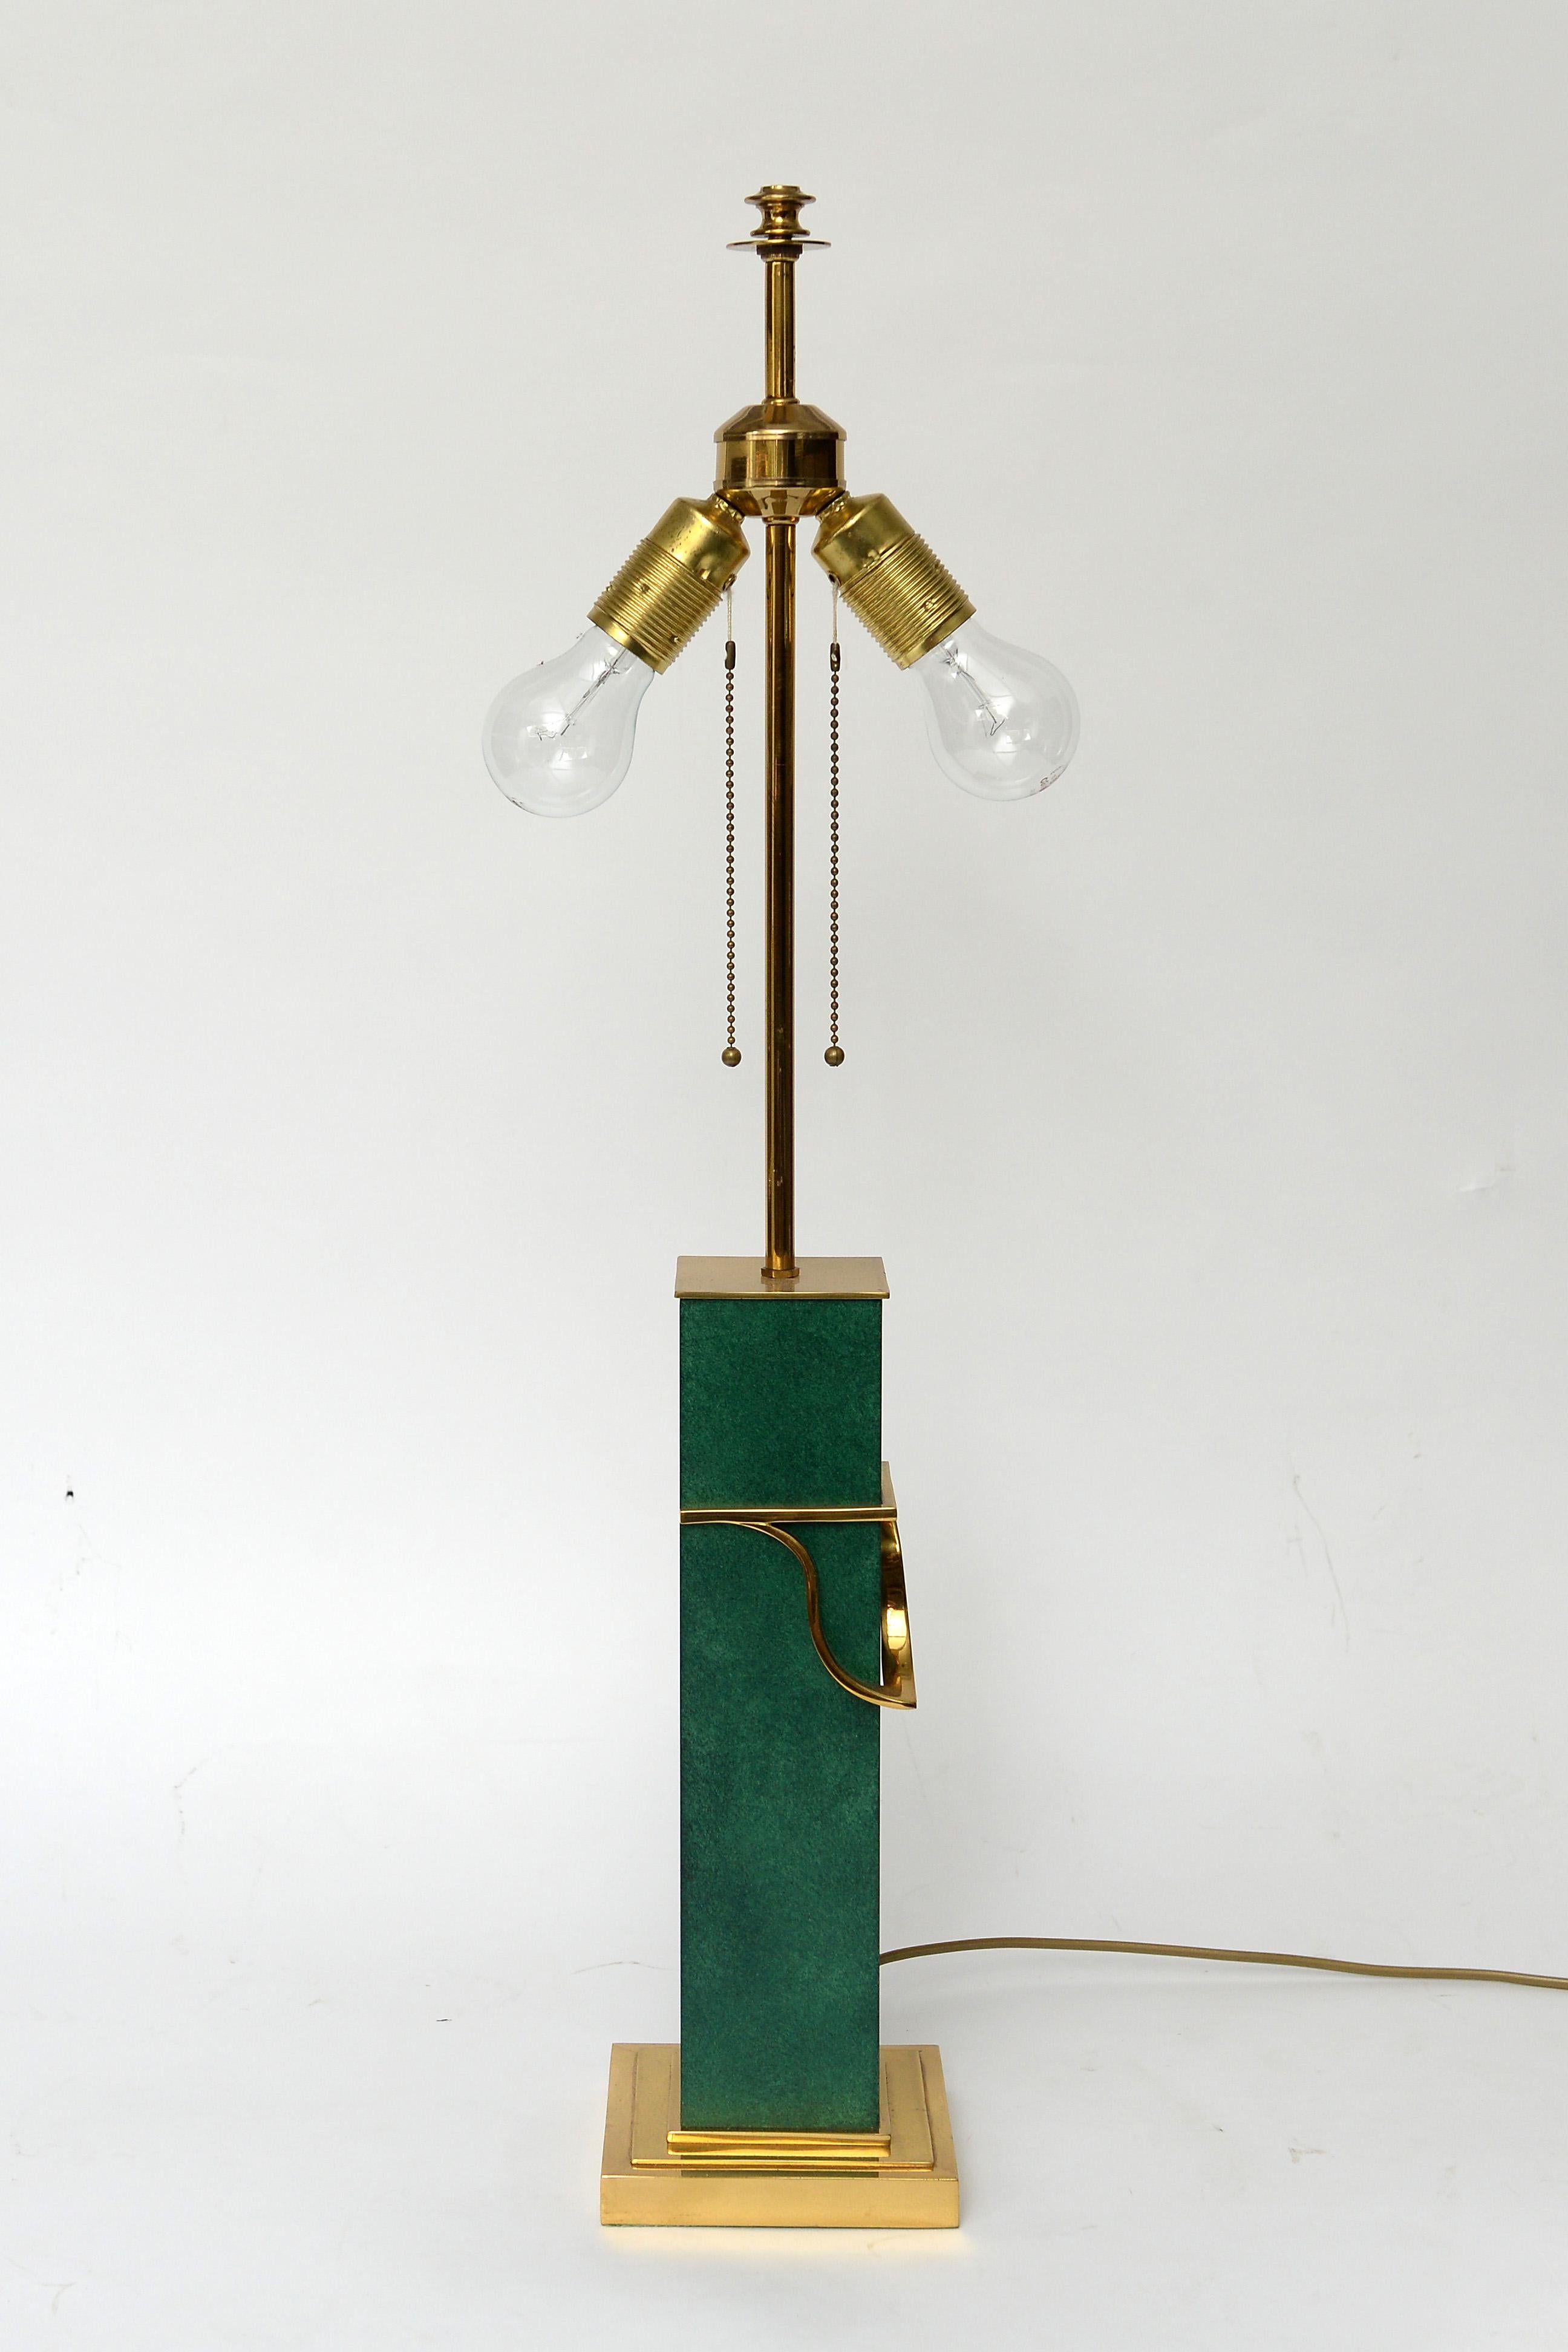 Stately and heavy green table lamp.

This decorative table lamp is mostly made from brass with a green central piece.

It comes with an impressive shade and has two- light points which can be illuminated separately with a brass pulling cord.